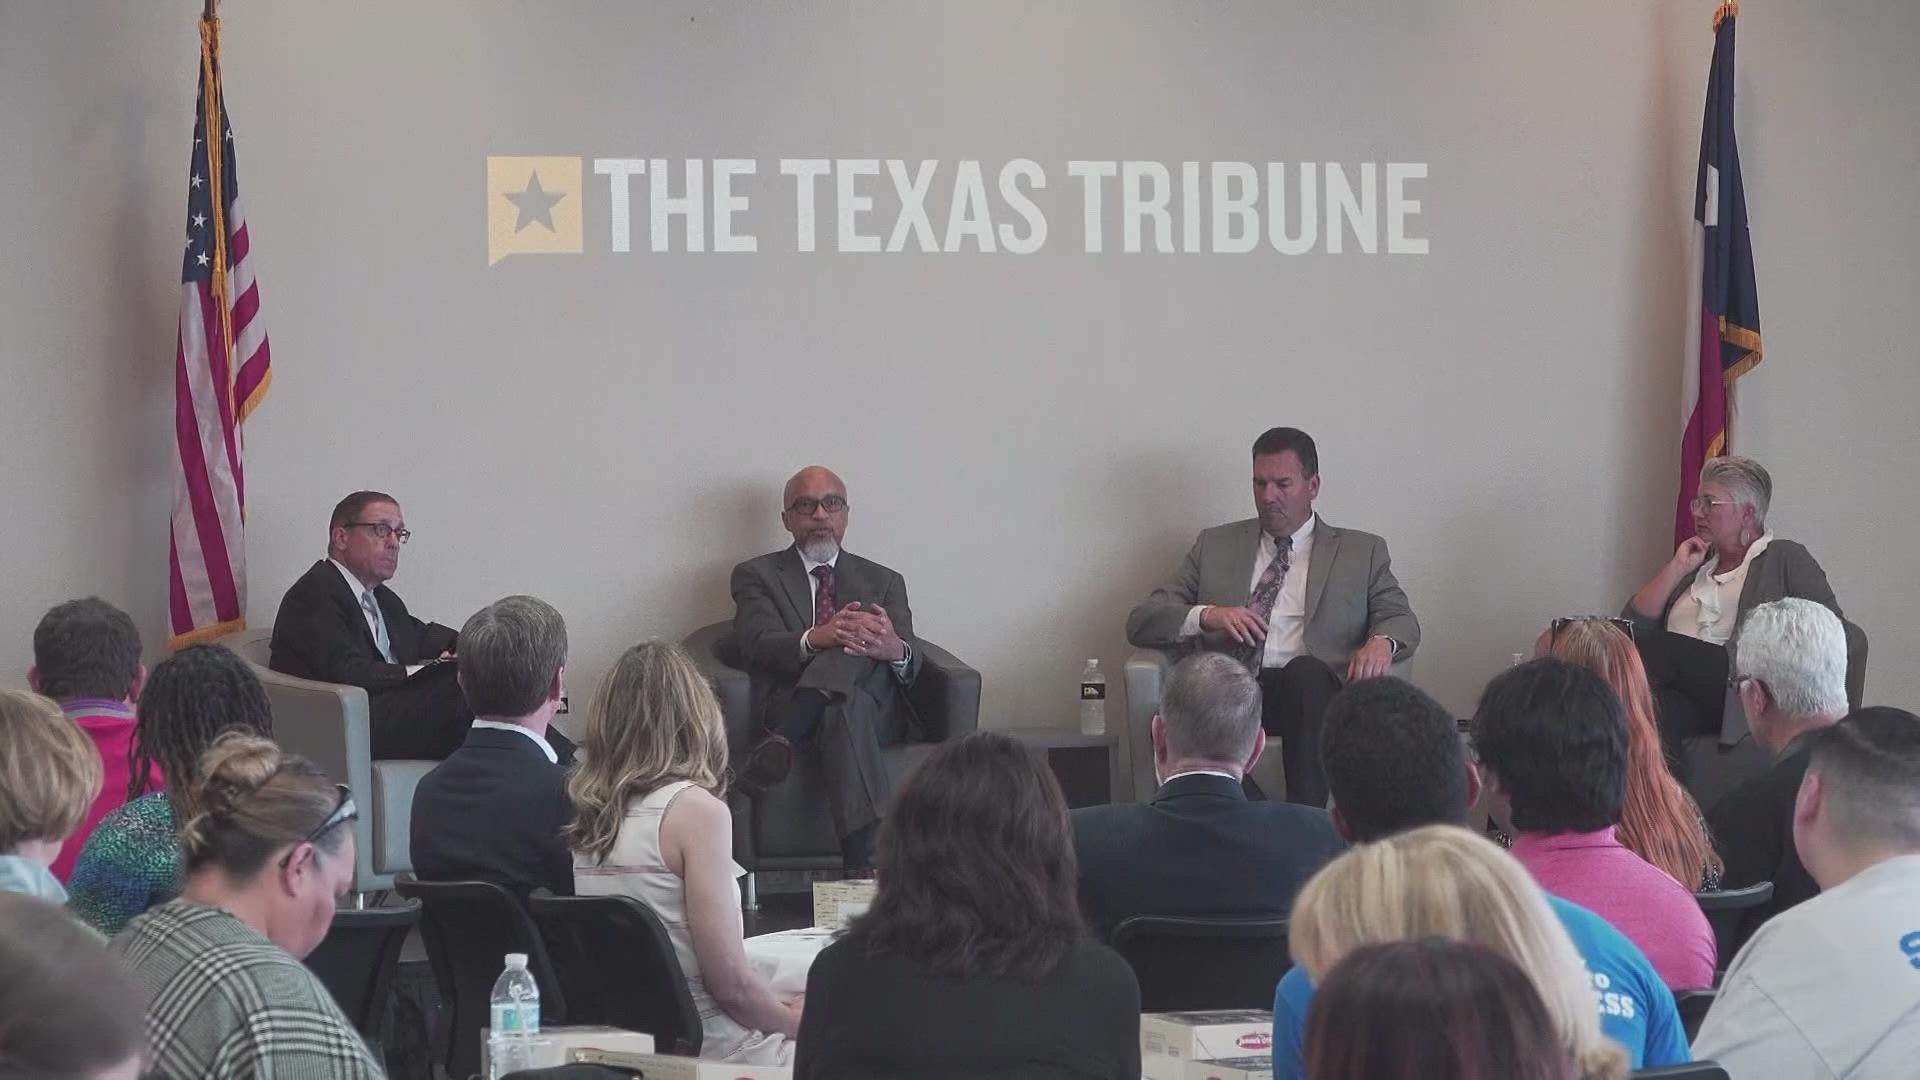 The Tribune was joined by the presidents of Odessa College and UTPB as well as ECISD's superintendent.